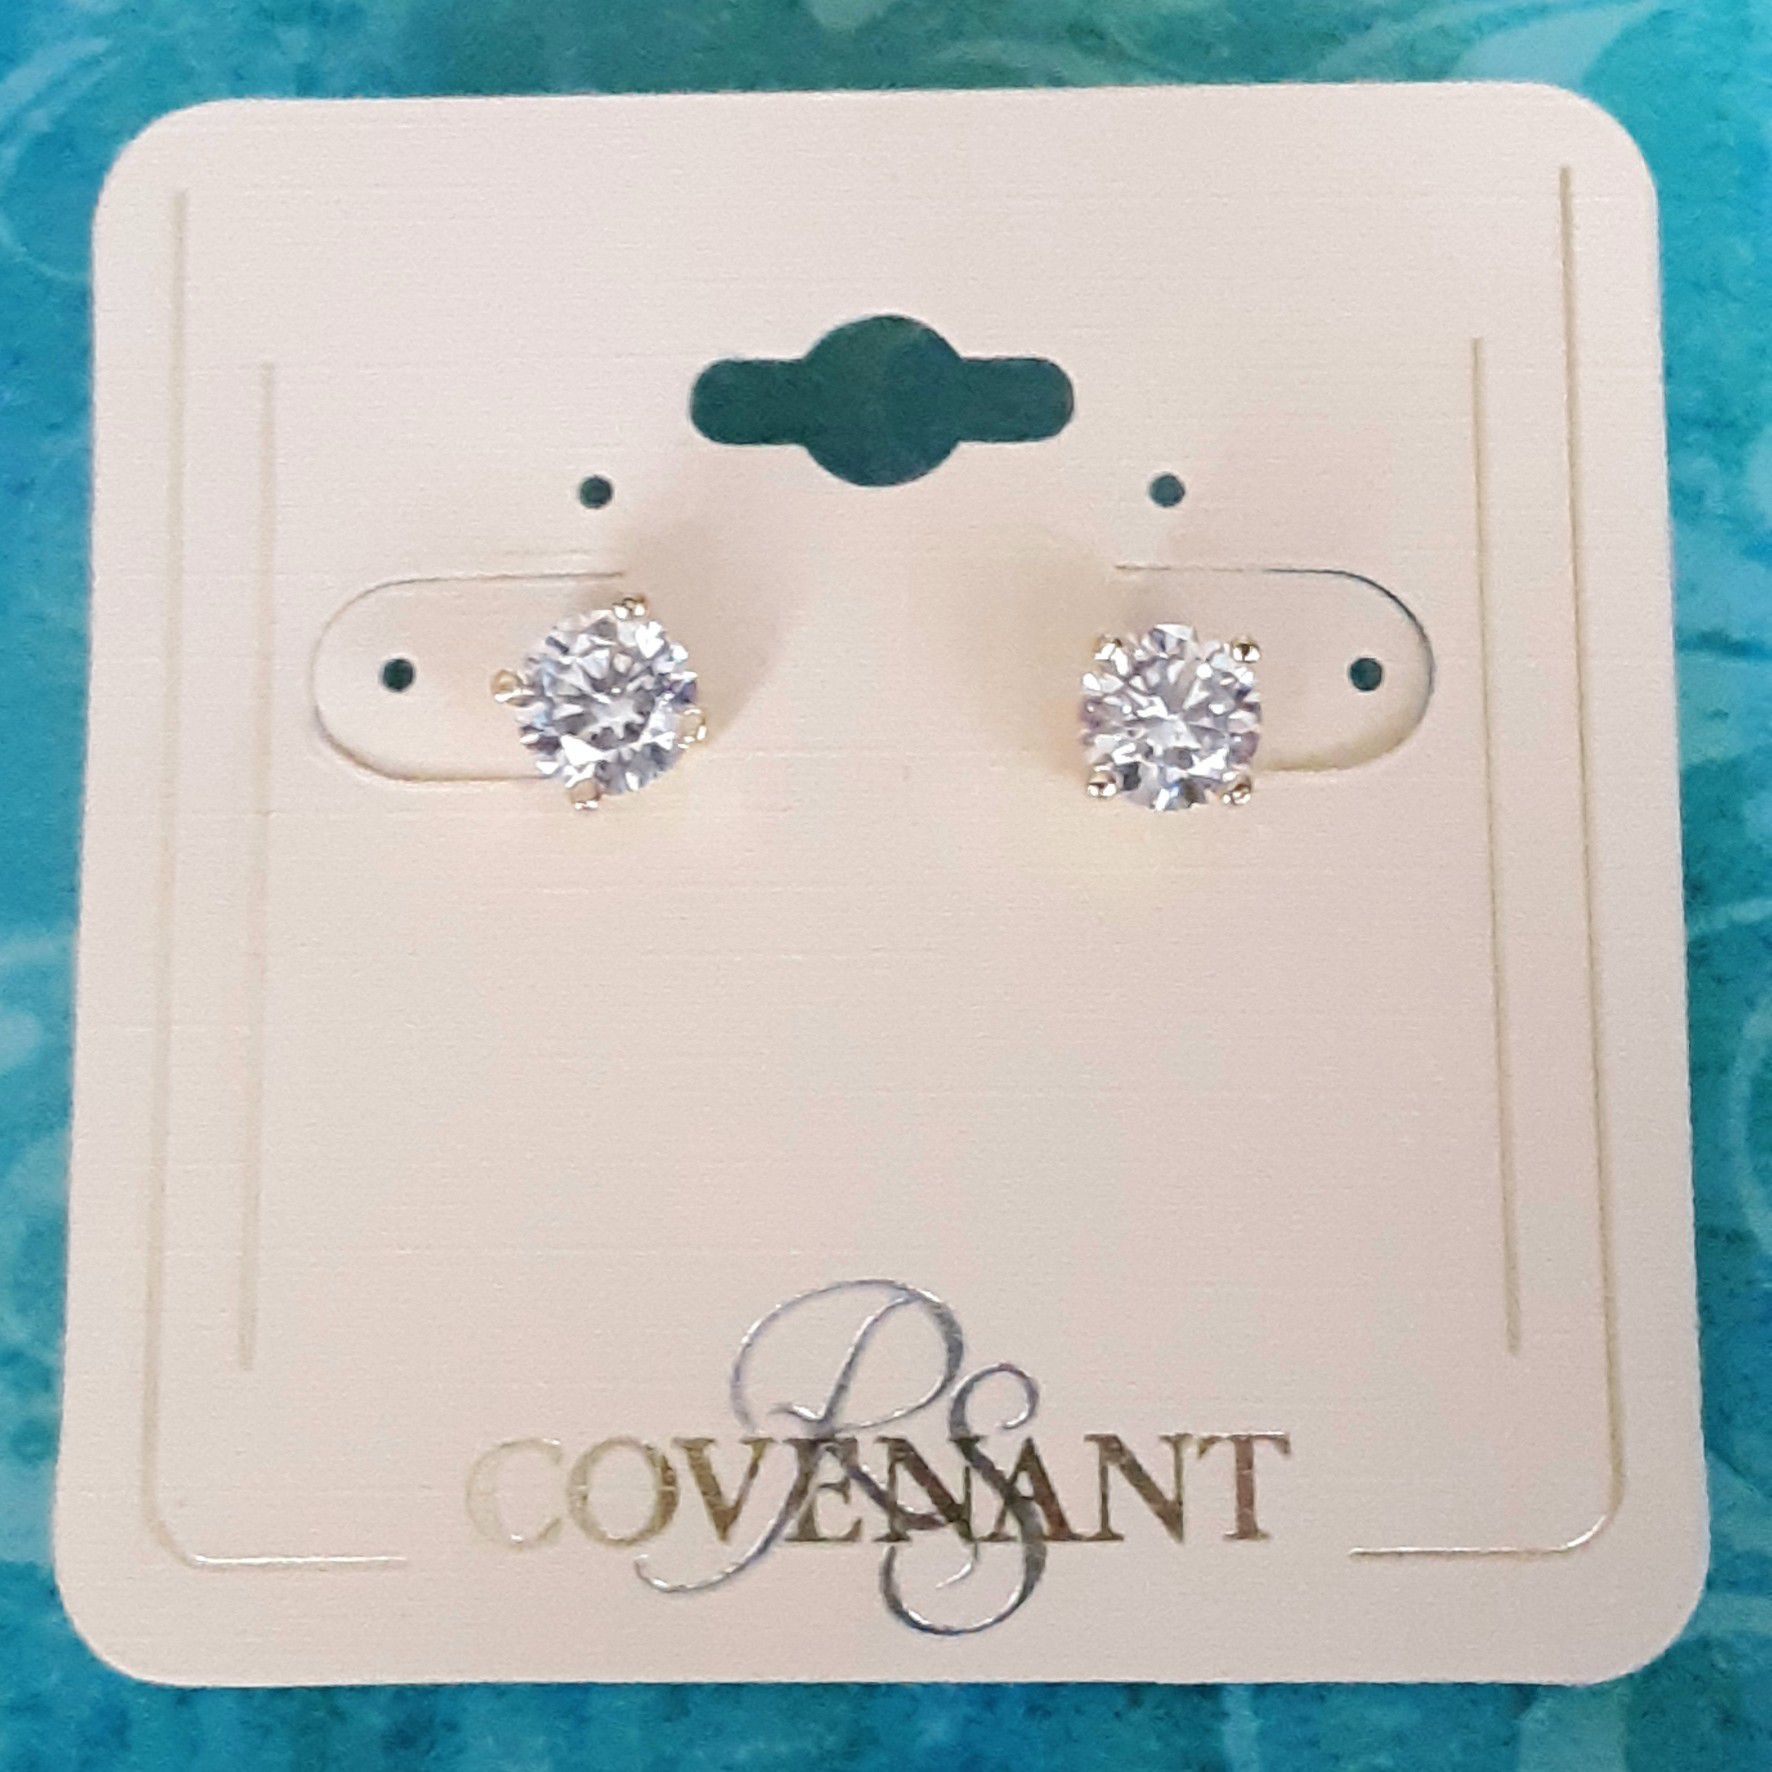 Shipping Only: New Covenant goldtone cubic zirconia hypo-allergenic earrings